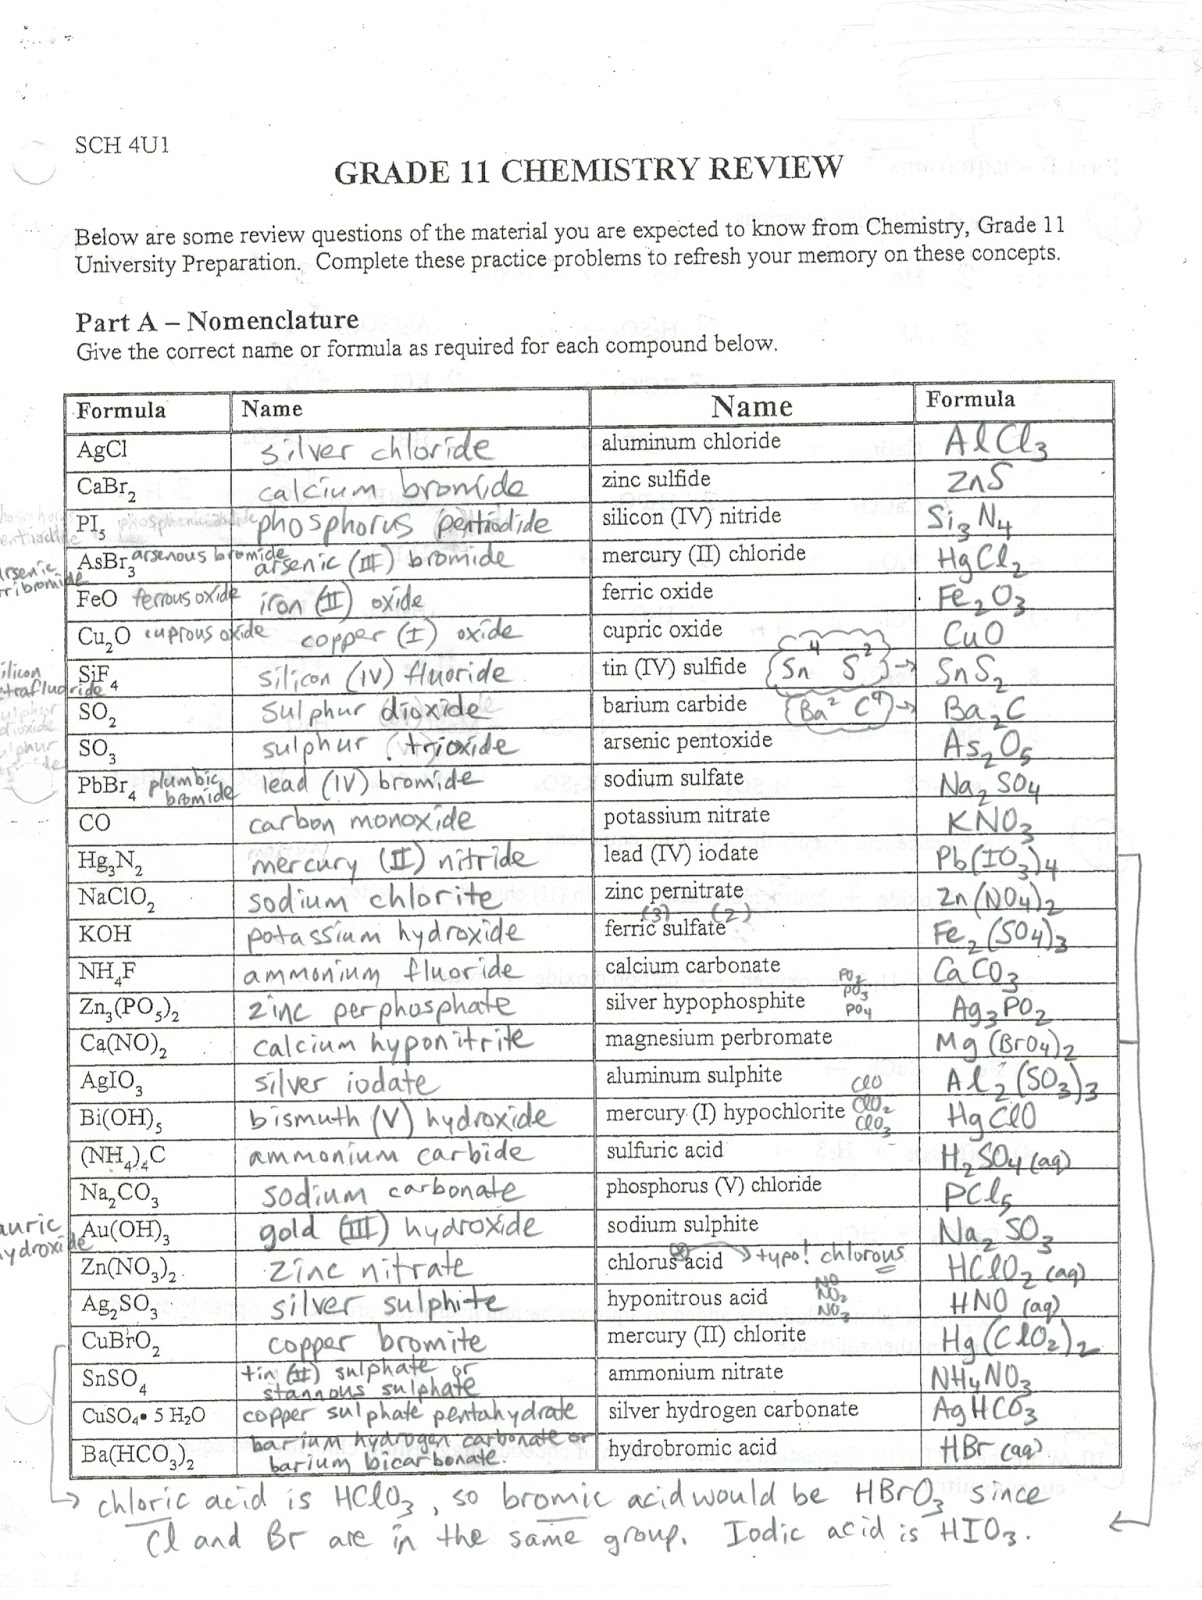 Ph And Poh Worksheet Answers - Nidecmege With Regard To Ph And Poh Worksheet Answers